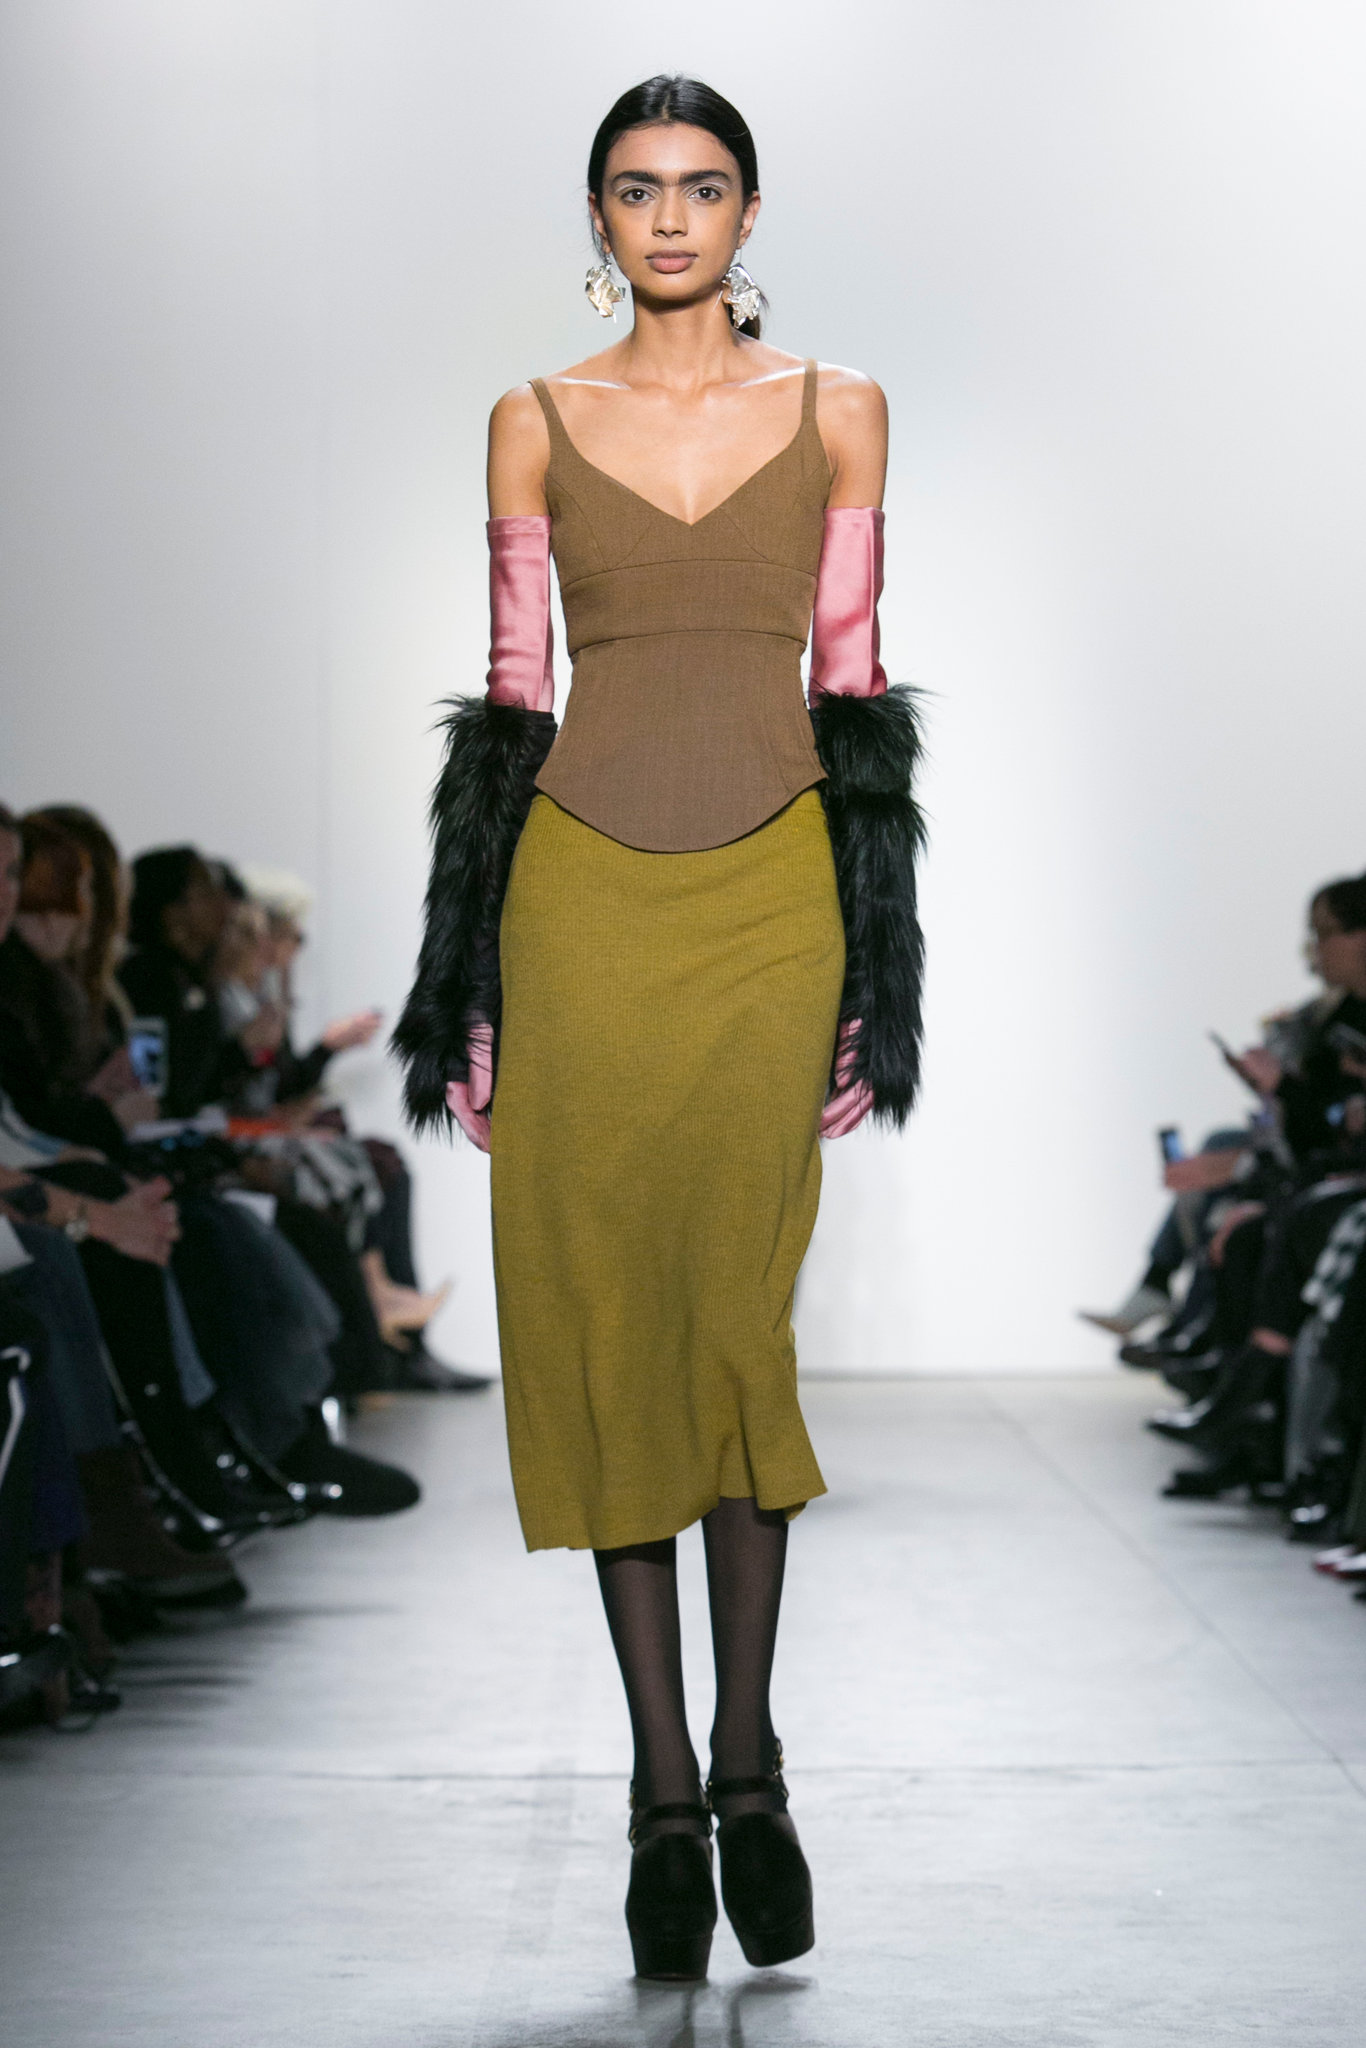 New York Fashion Week Is Showing A New Sleeve Trend | Fashion News ...